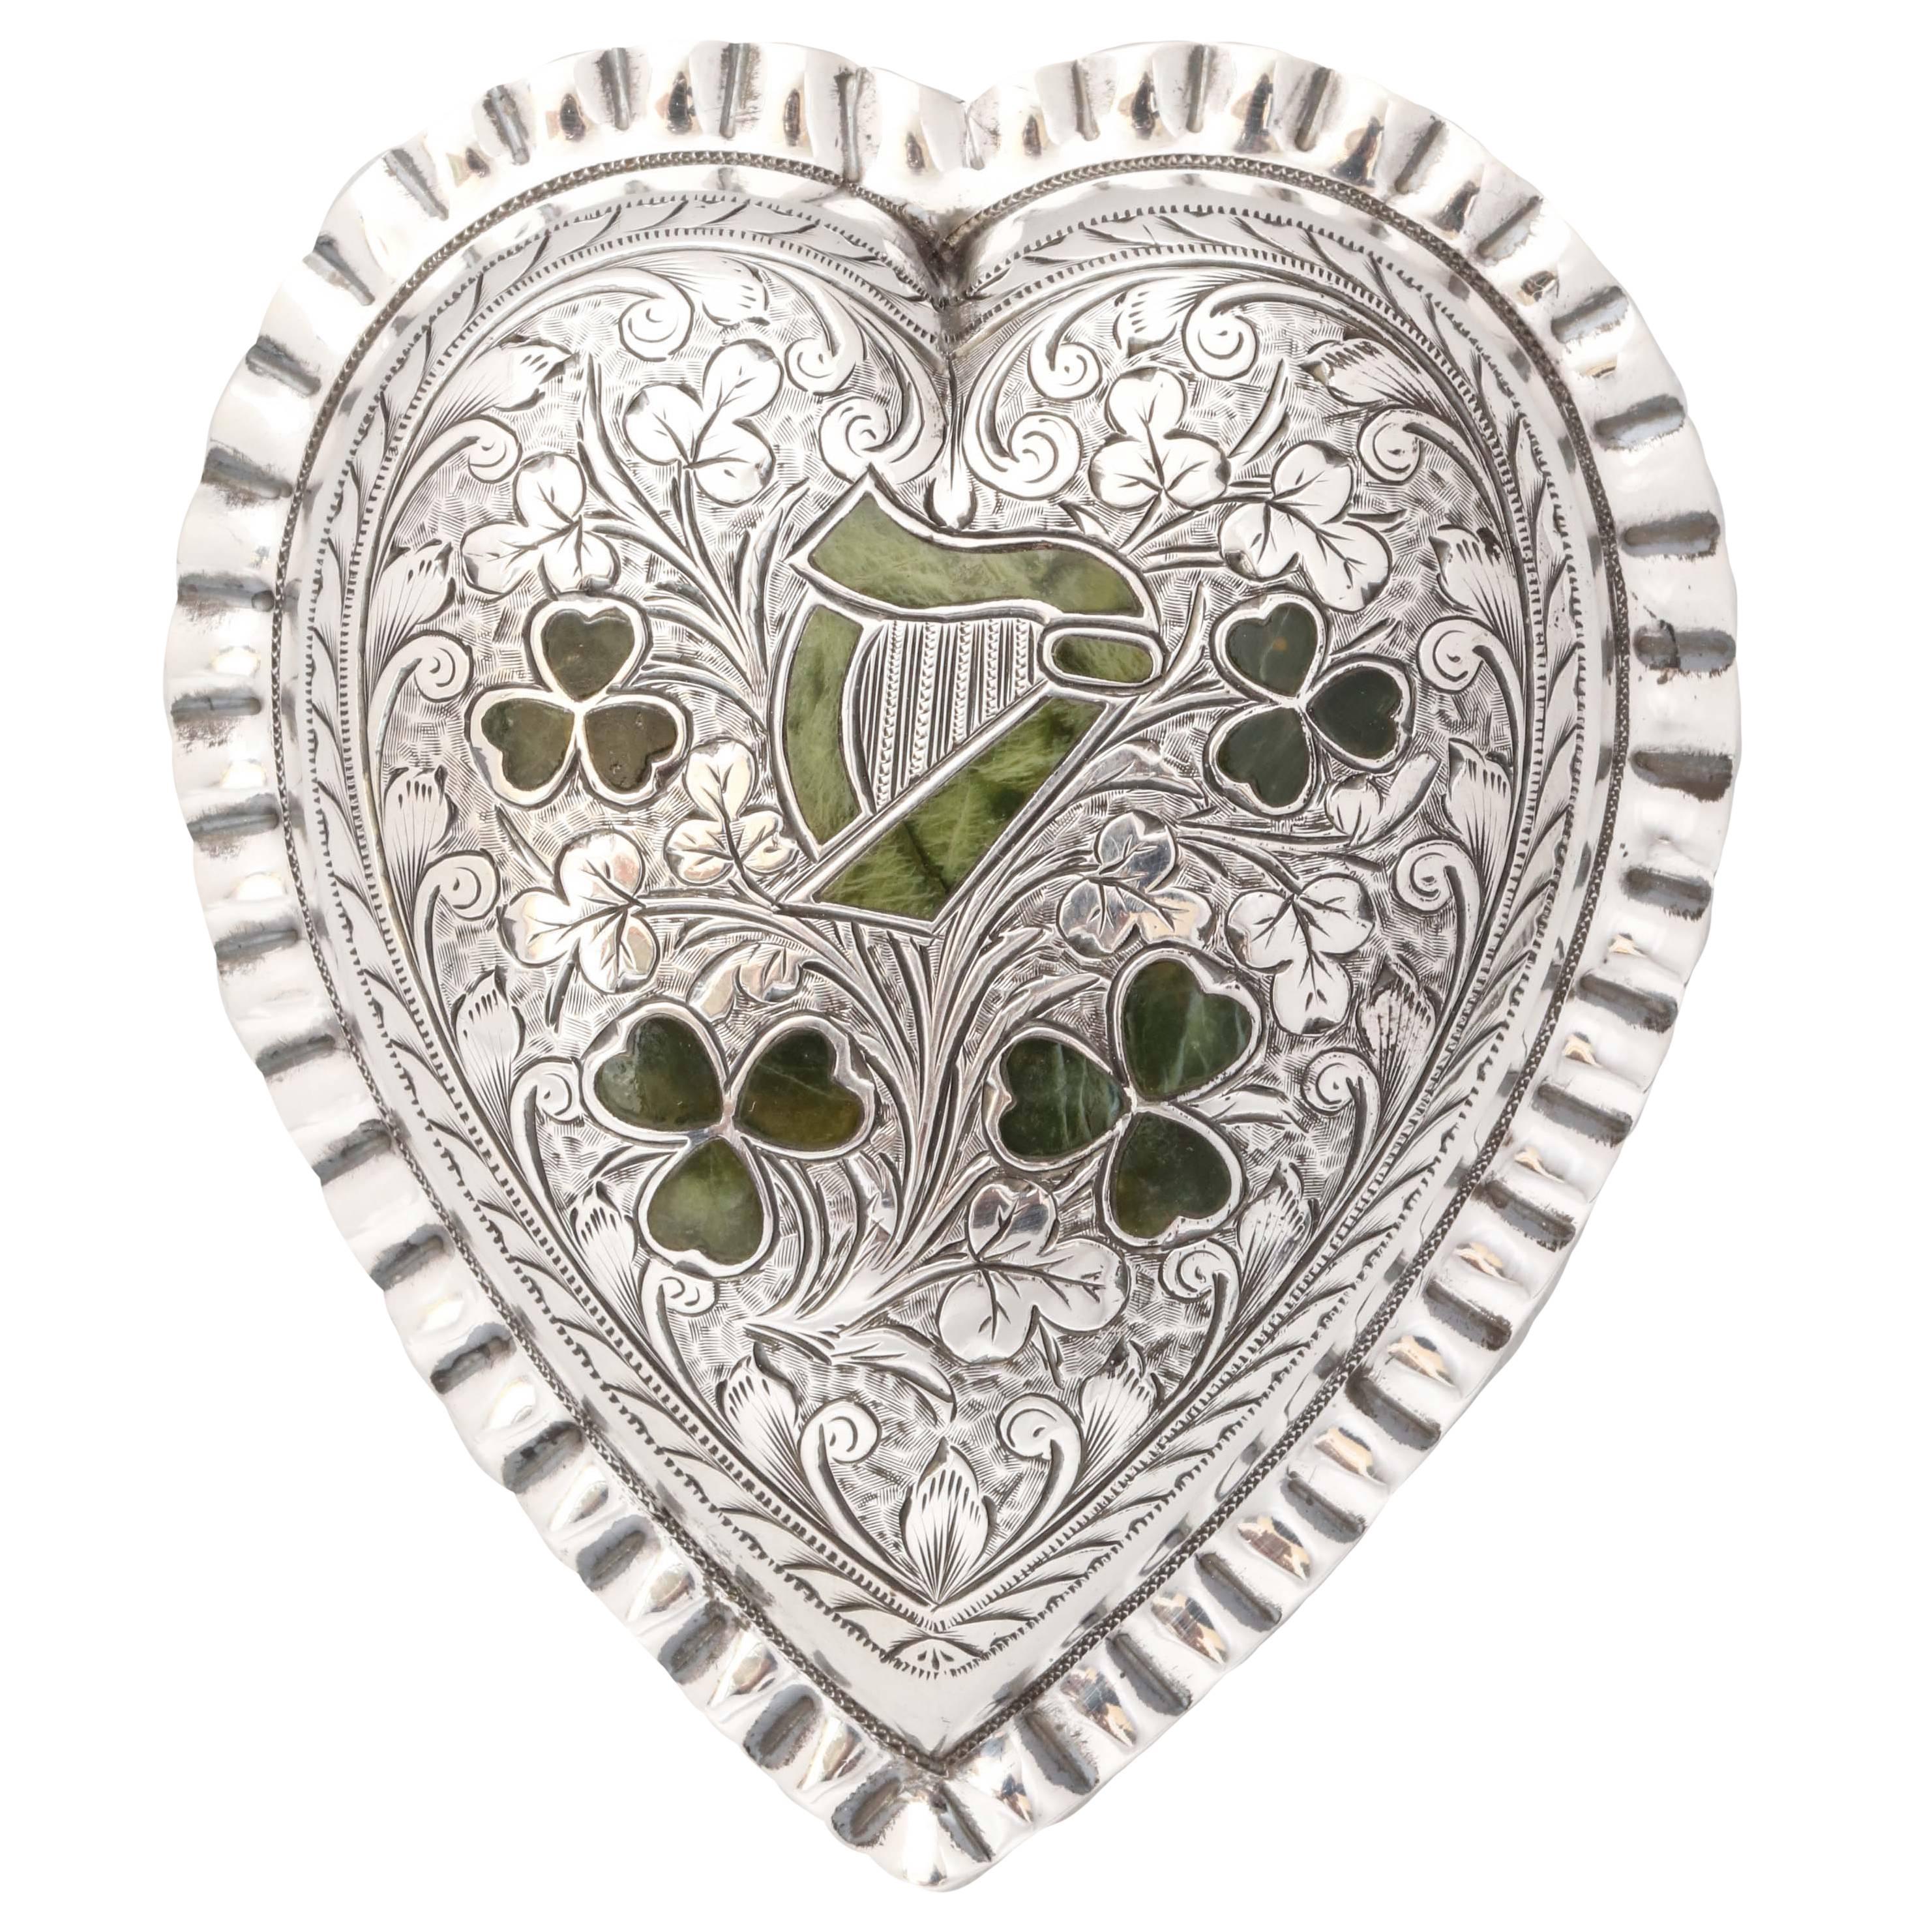 Edwardian Sterling Silver and Agate Heart Form Box with Hinged Lid, Irish Motif